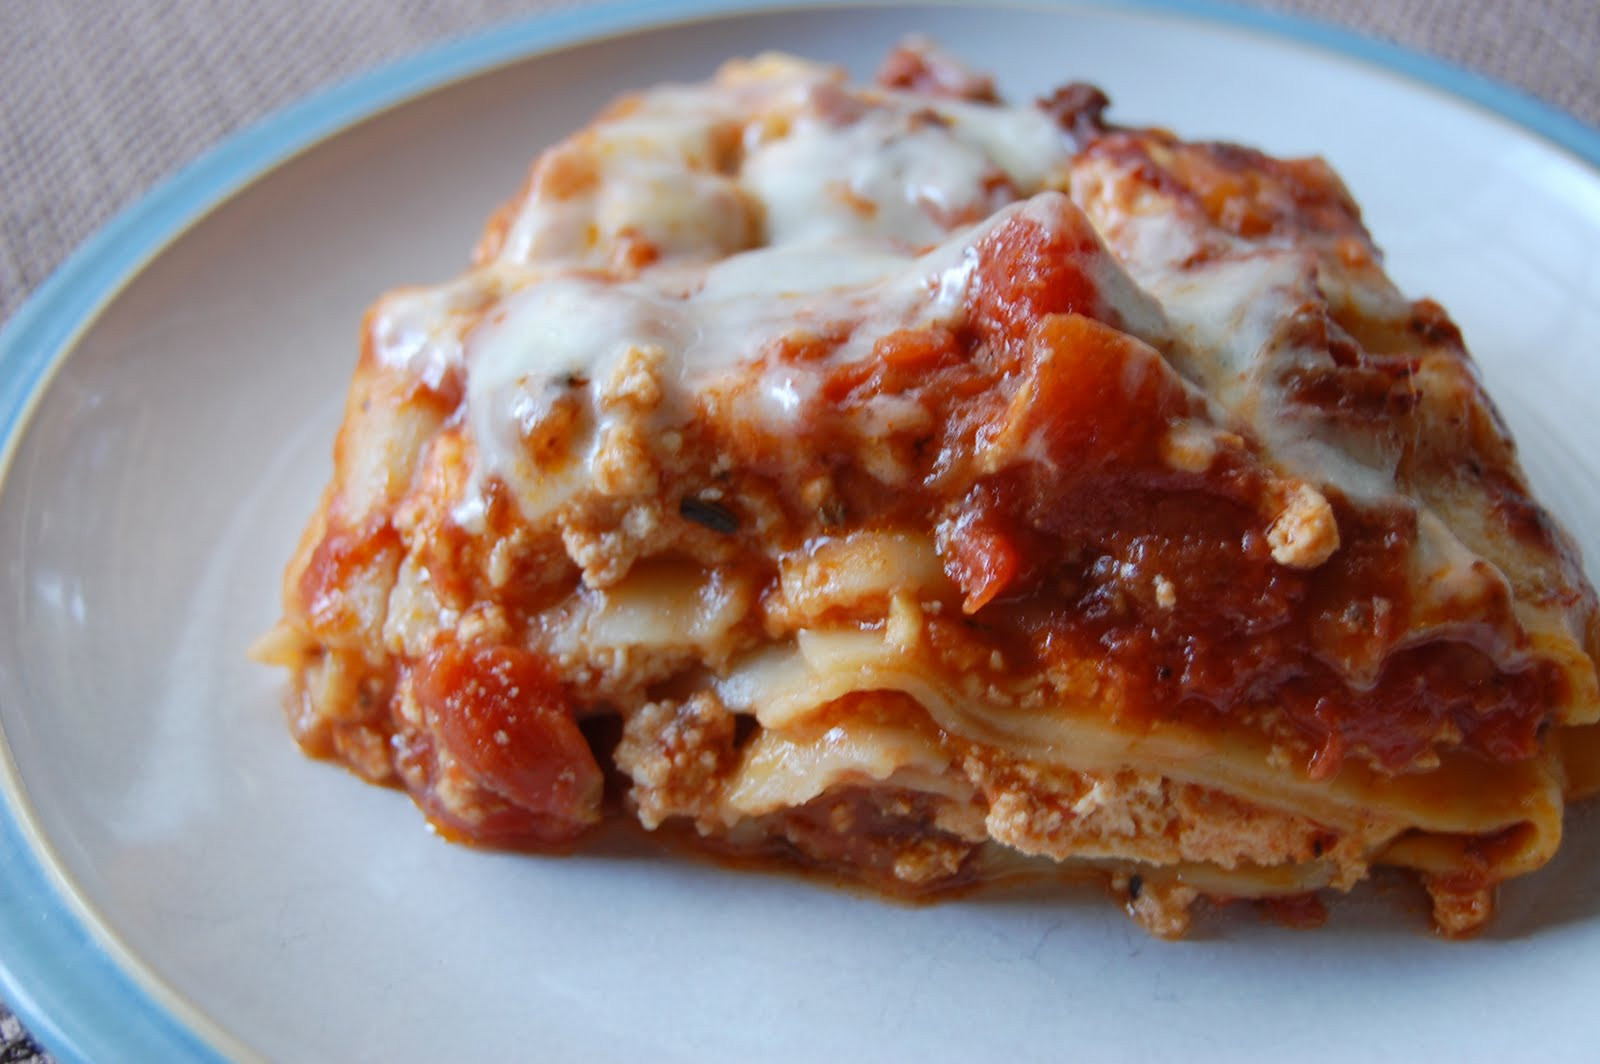 20 Best Crockpot Lasagna with Ricotta Cheese - Best Recipes Ideas and ...